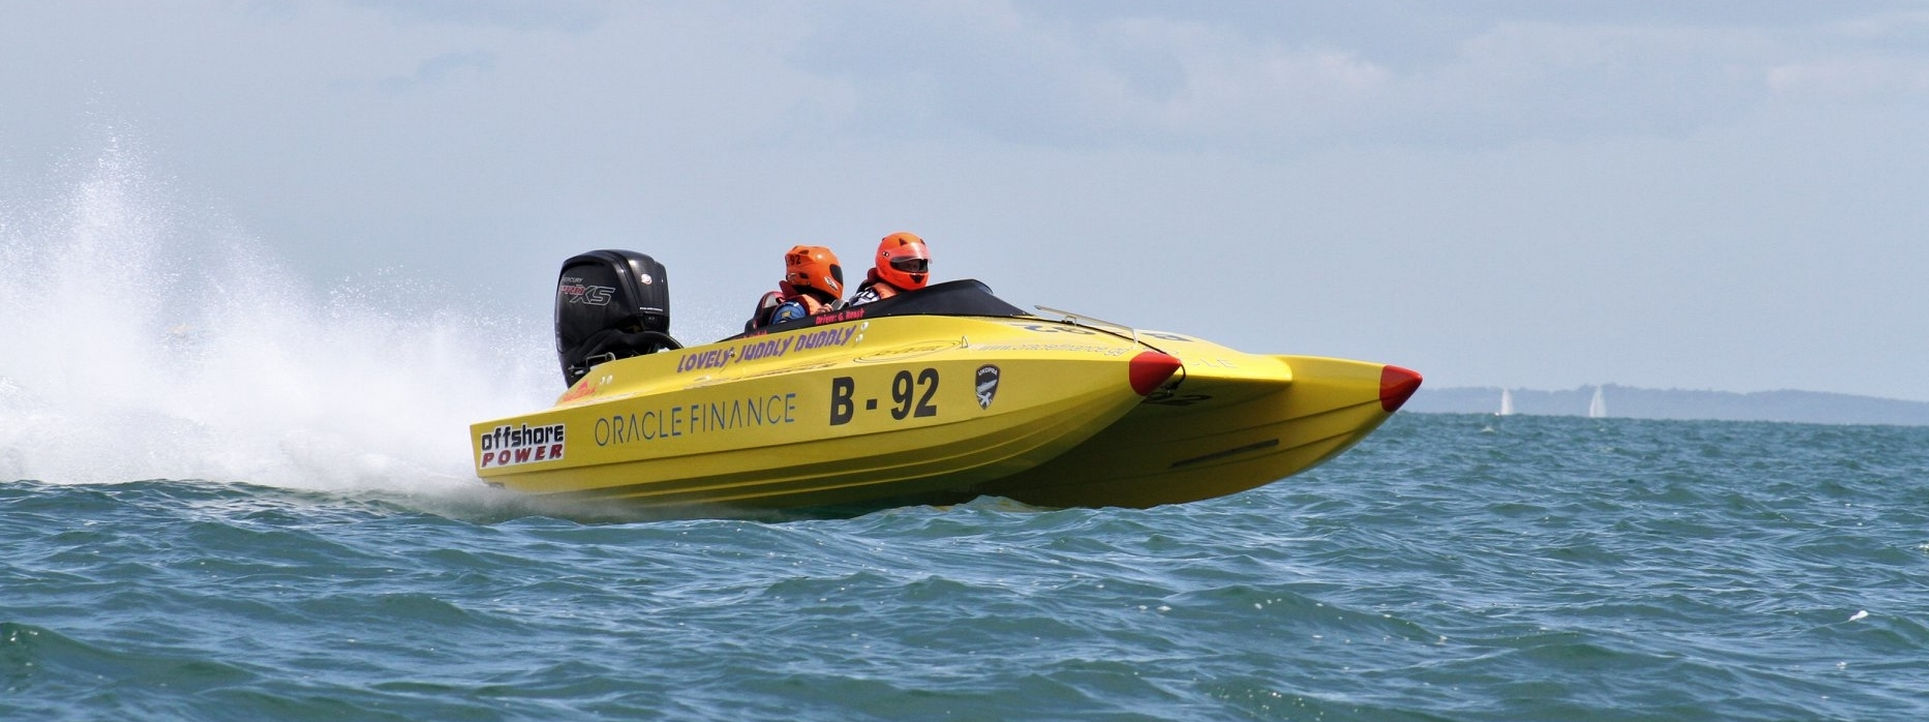 round isle of wight powerboat race